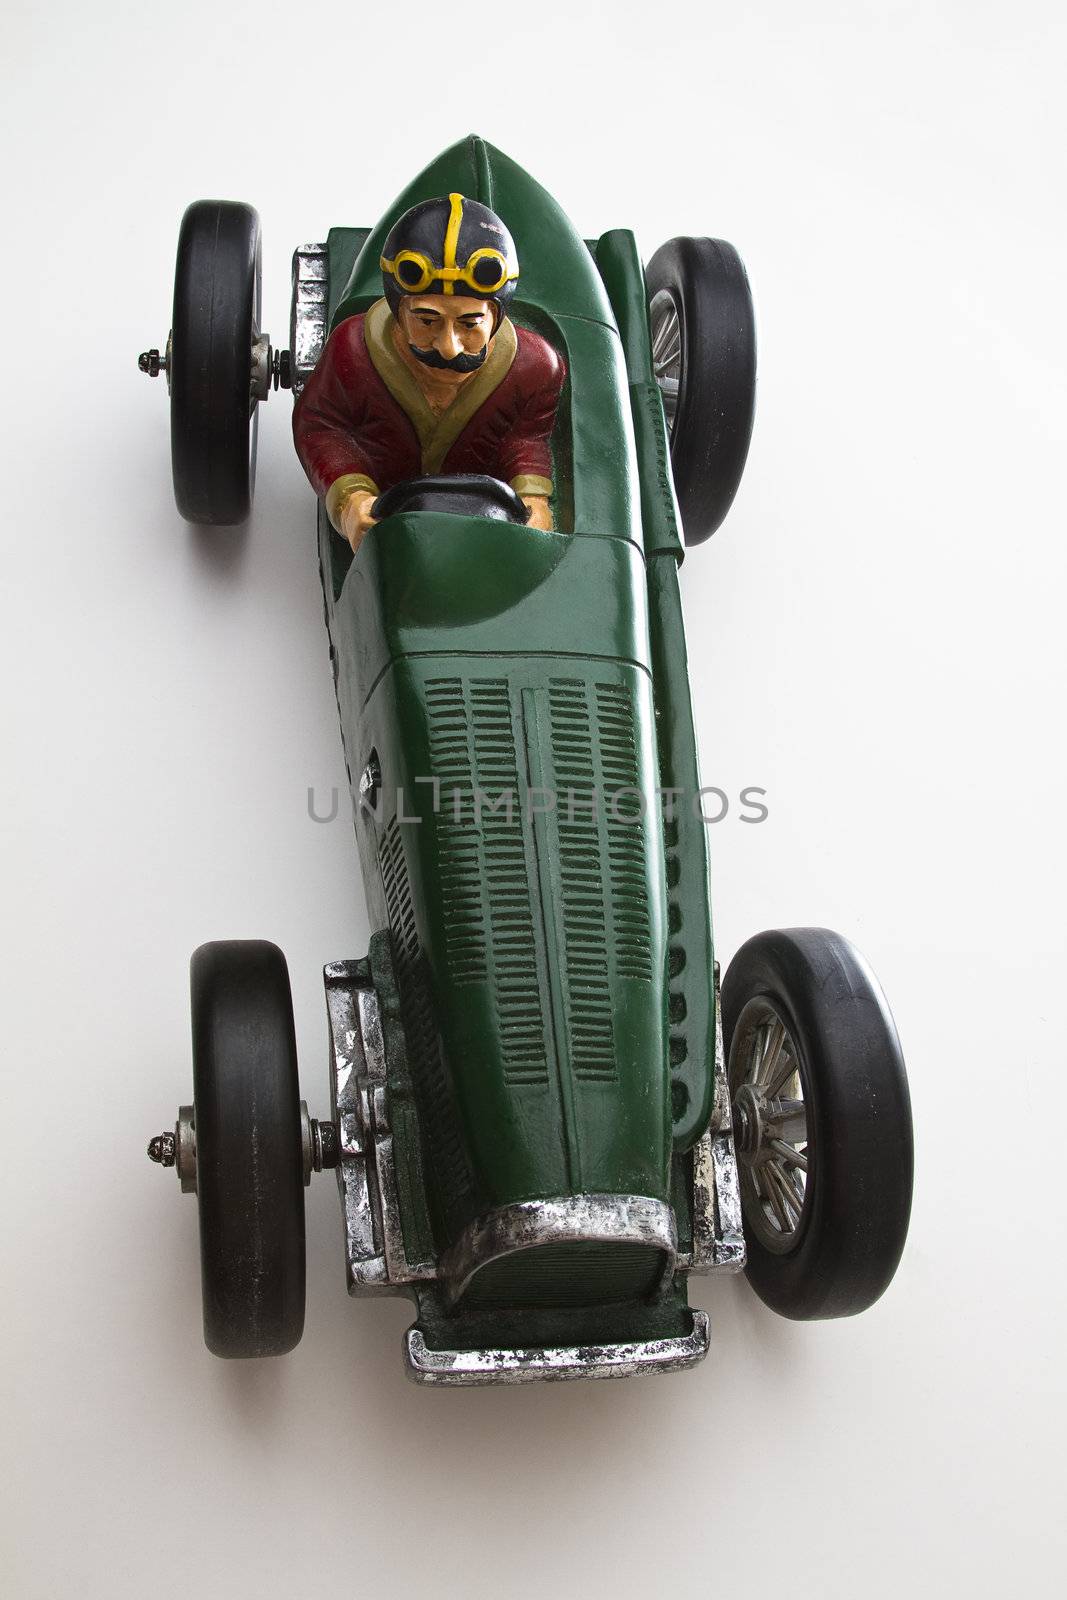 vintage toy race car with mustache driver